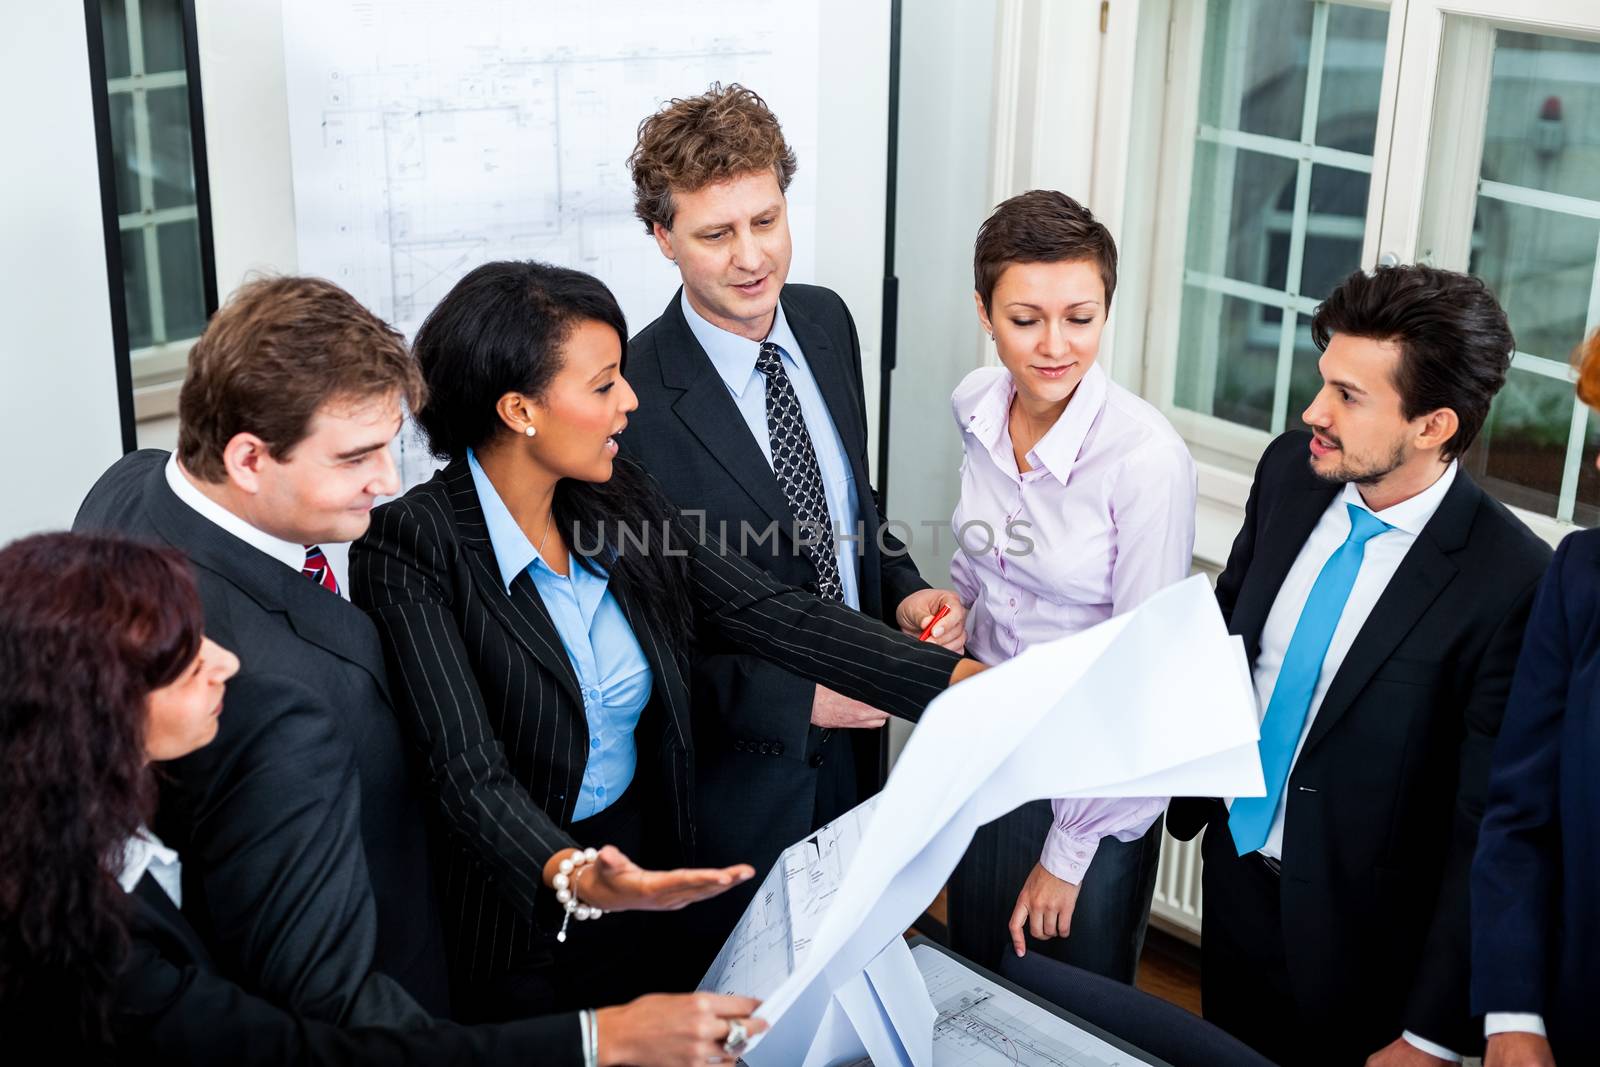 business people discussing architecture plan sketch  by juniart